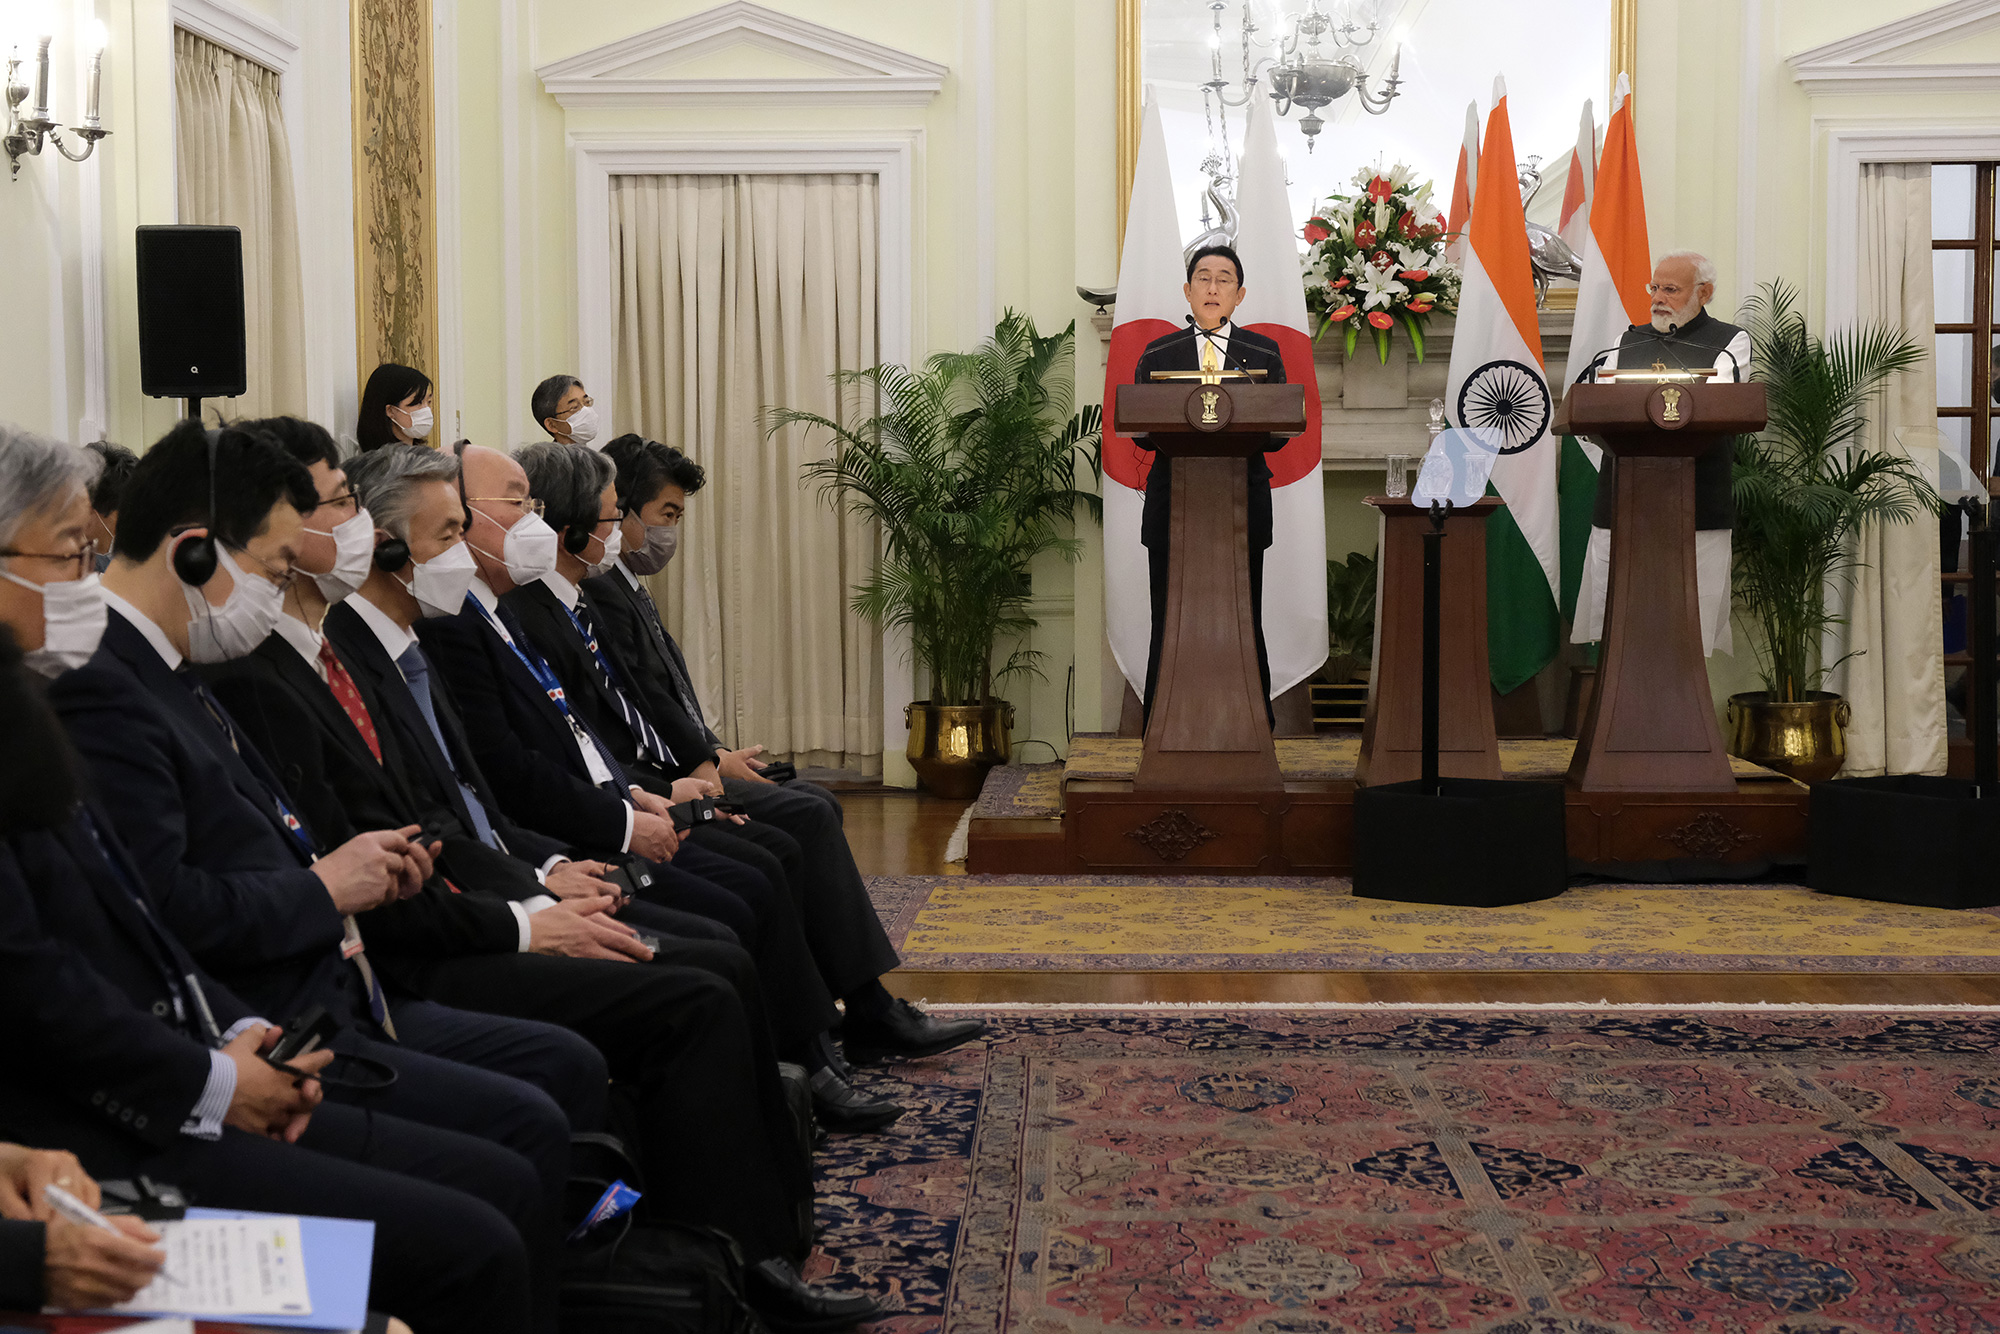 Japanese Prime Minister Fumio Kishida, center, speaks during a joint press conference with Prime Minister of India Narendra Modi in New Delhi, India, on Saturday, March 19.